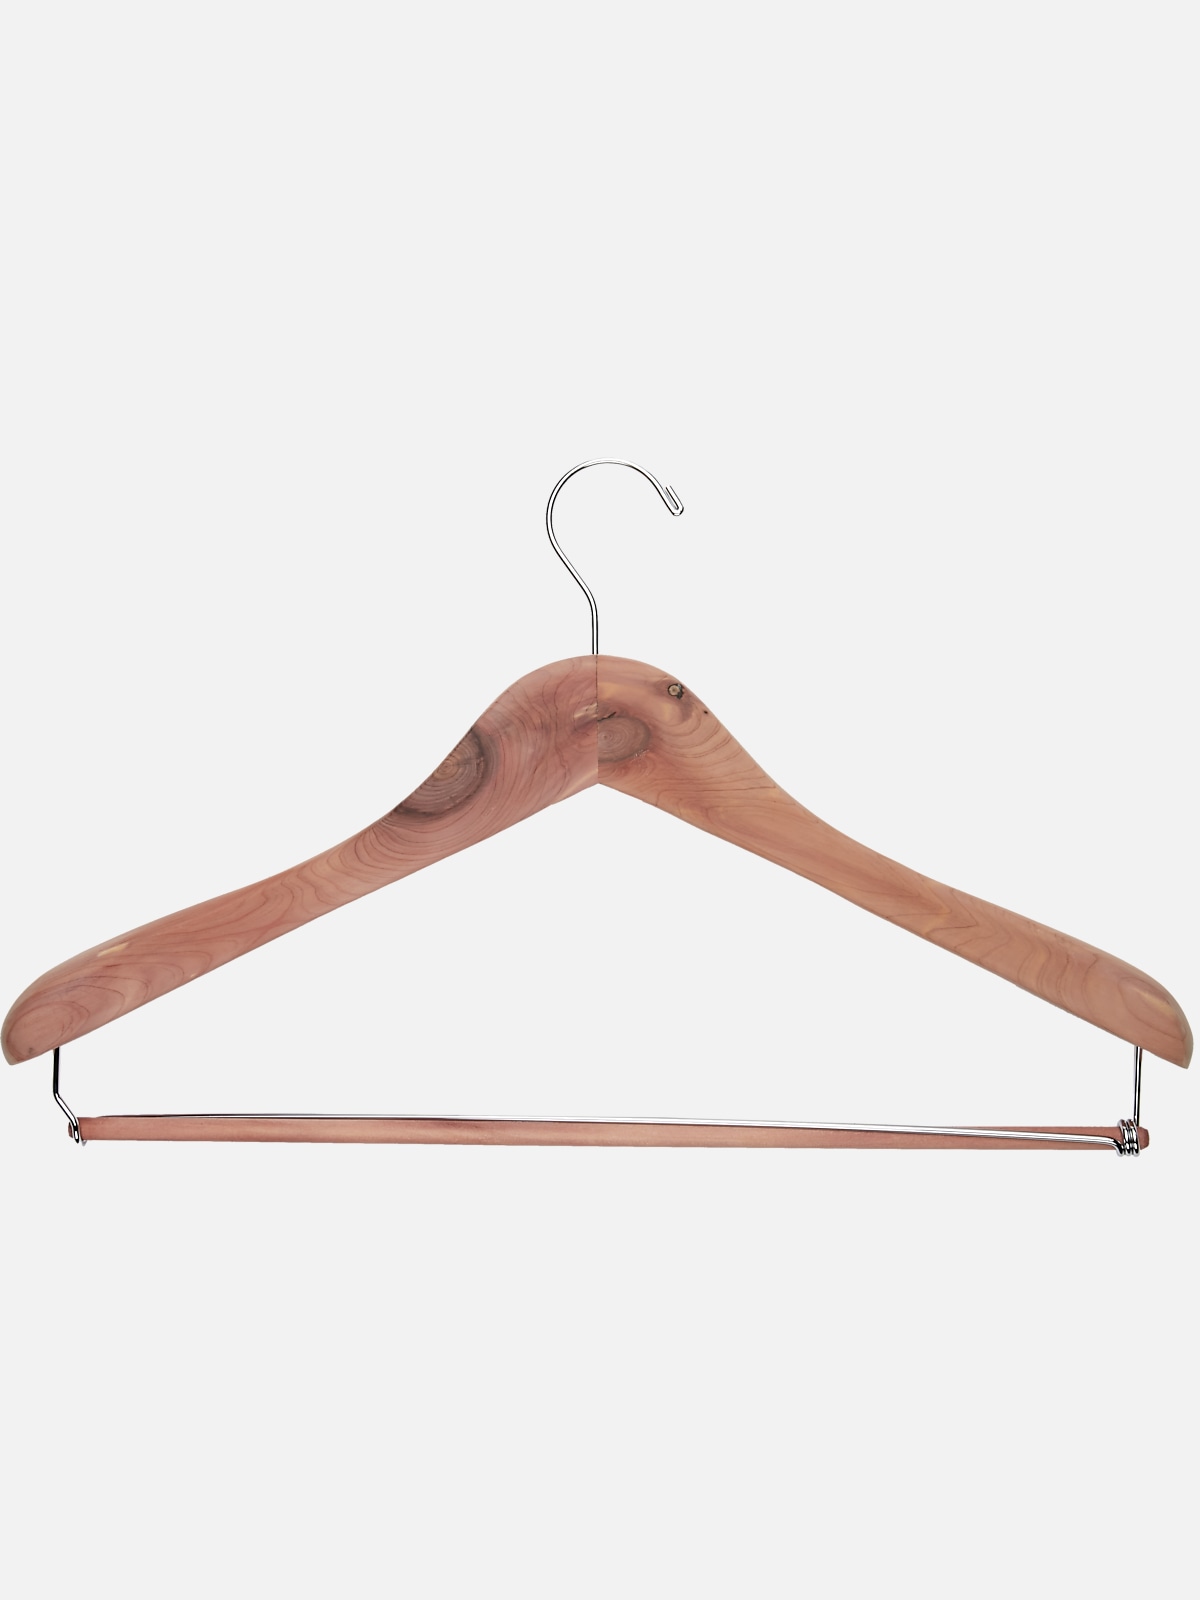 Wire Hanger Used to Hang Pants, Clothes, Gloves, Socks